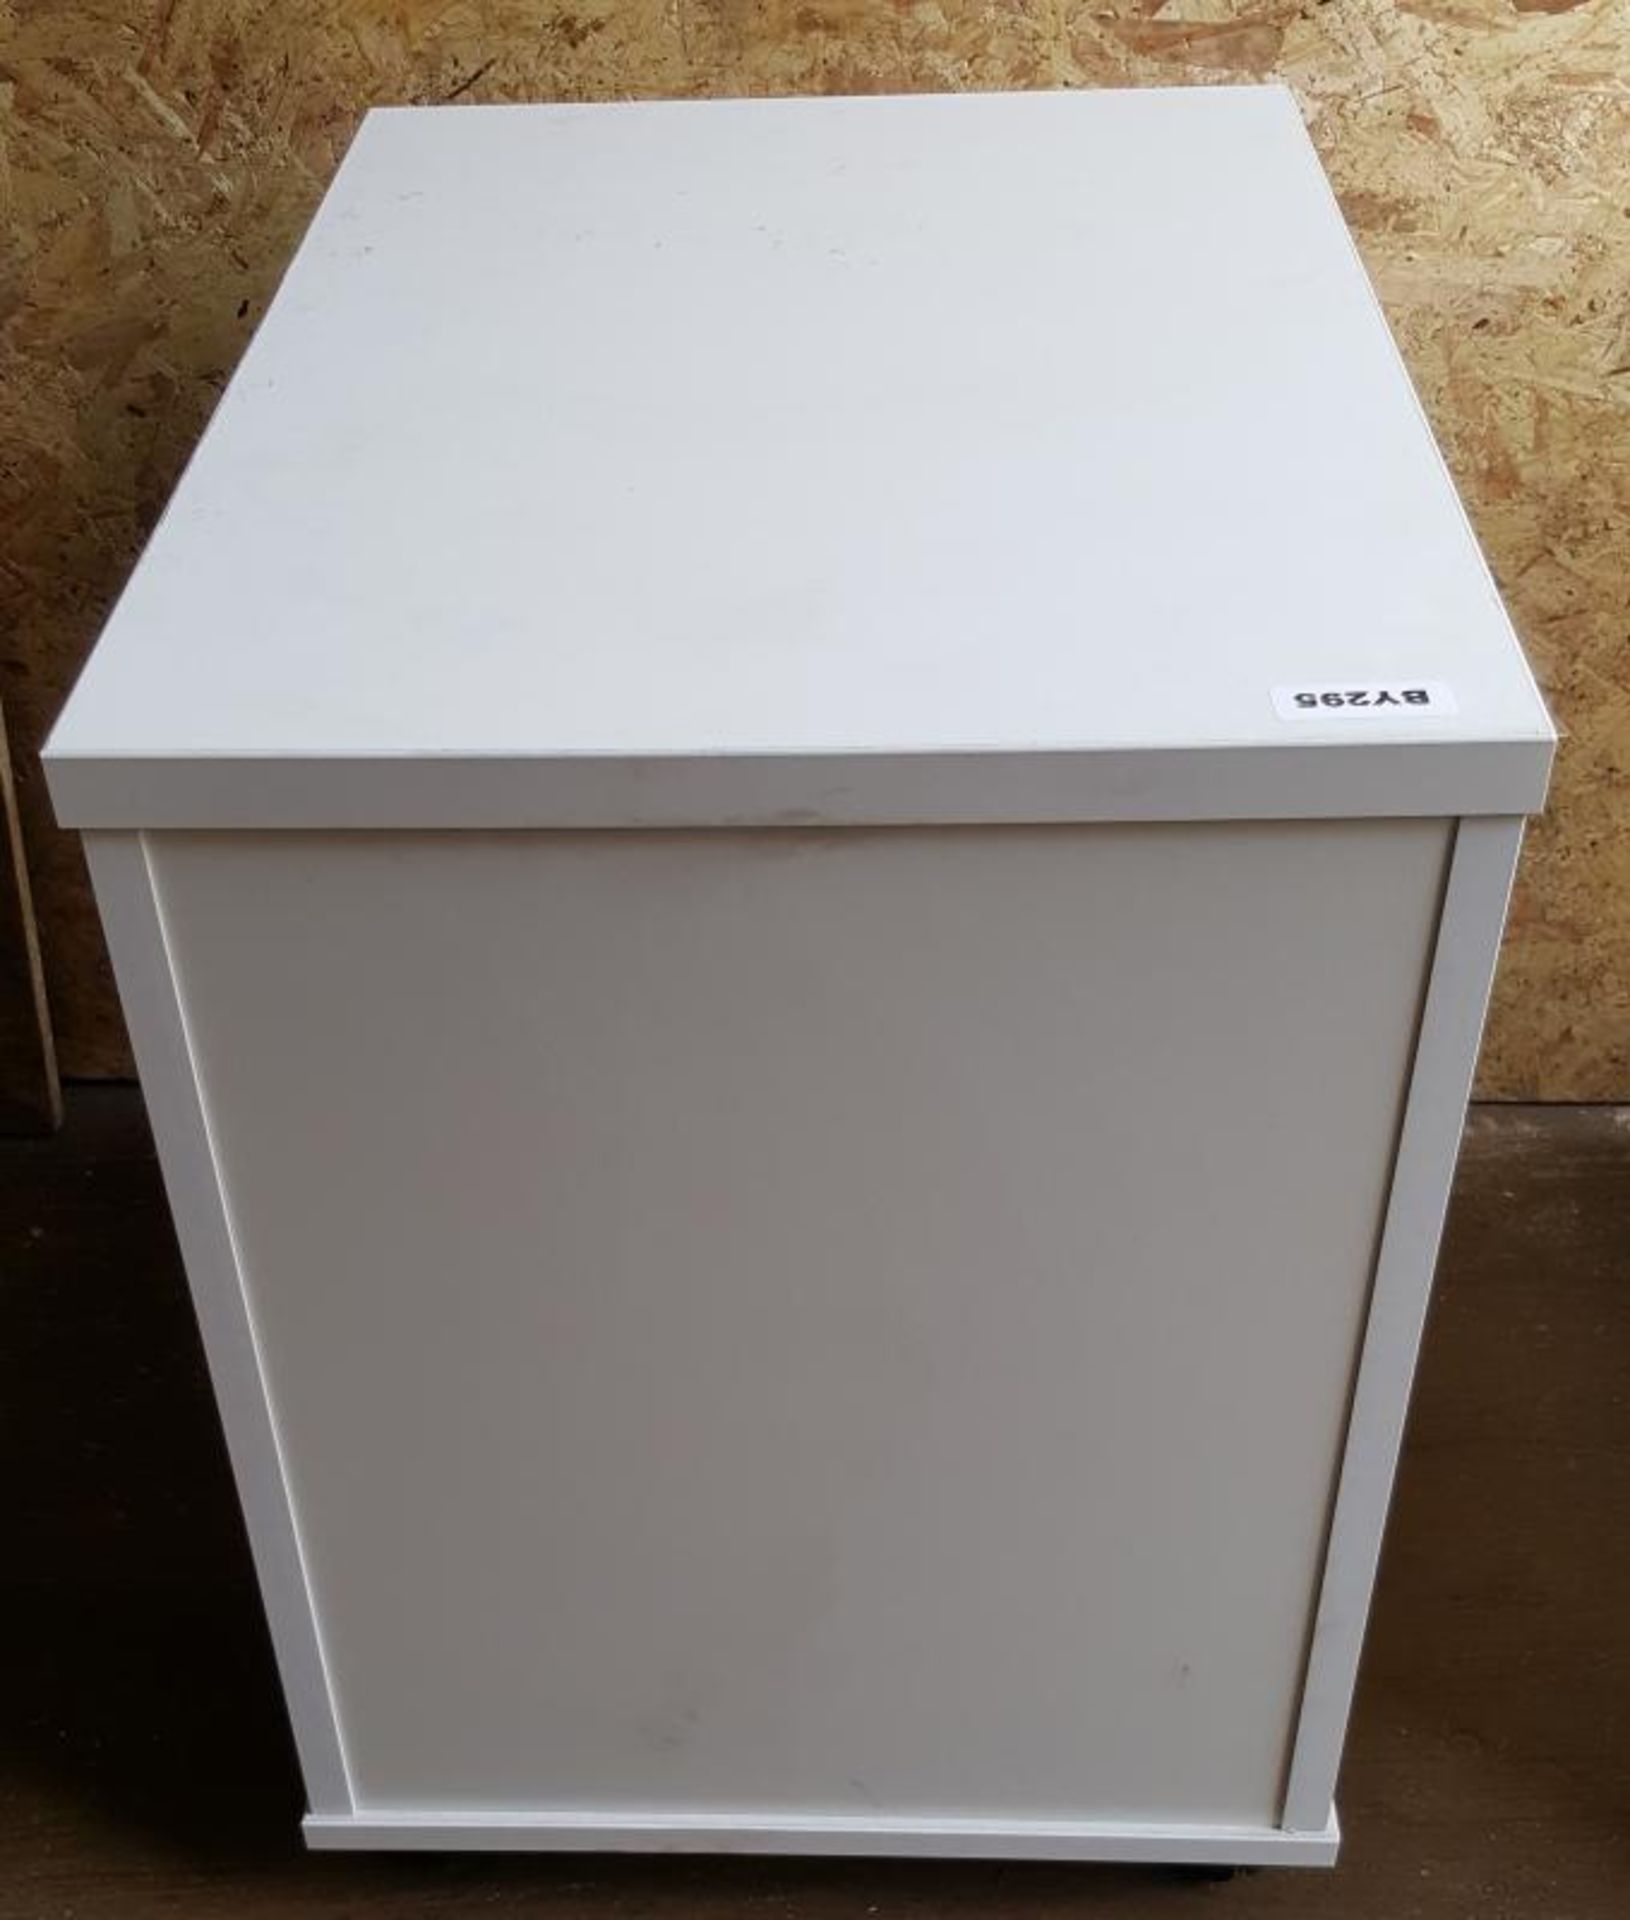 Matching Pair Of Mobile Under-Counter Wooden Lockable Office Drawers In White On Castors - Ref BY294 - Image 2 of 4